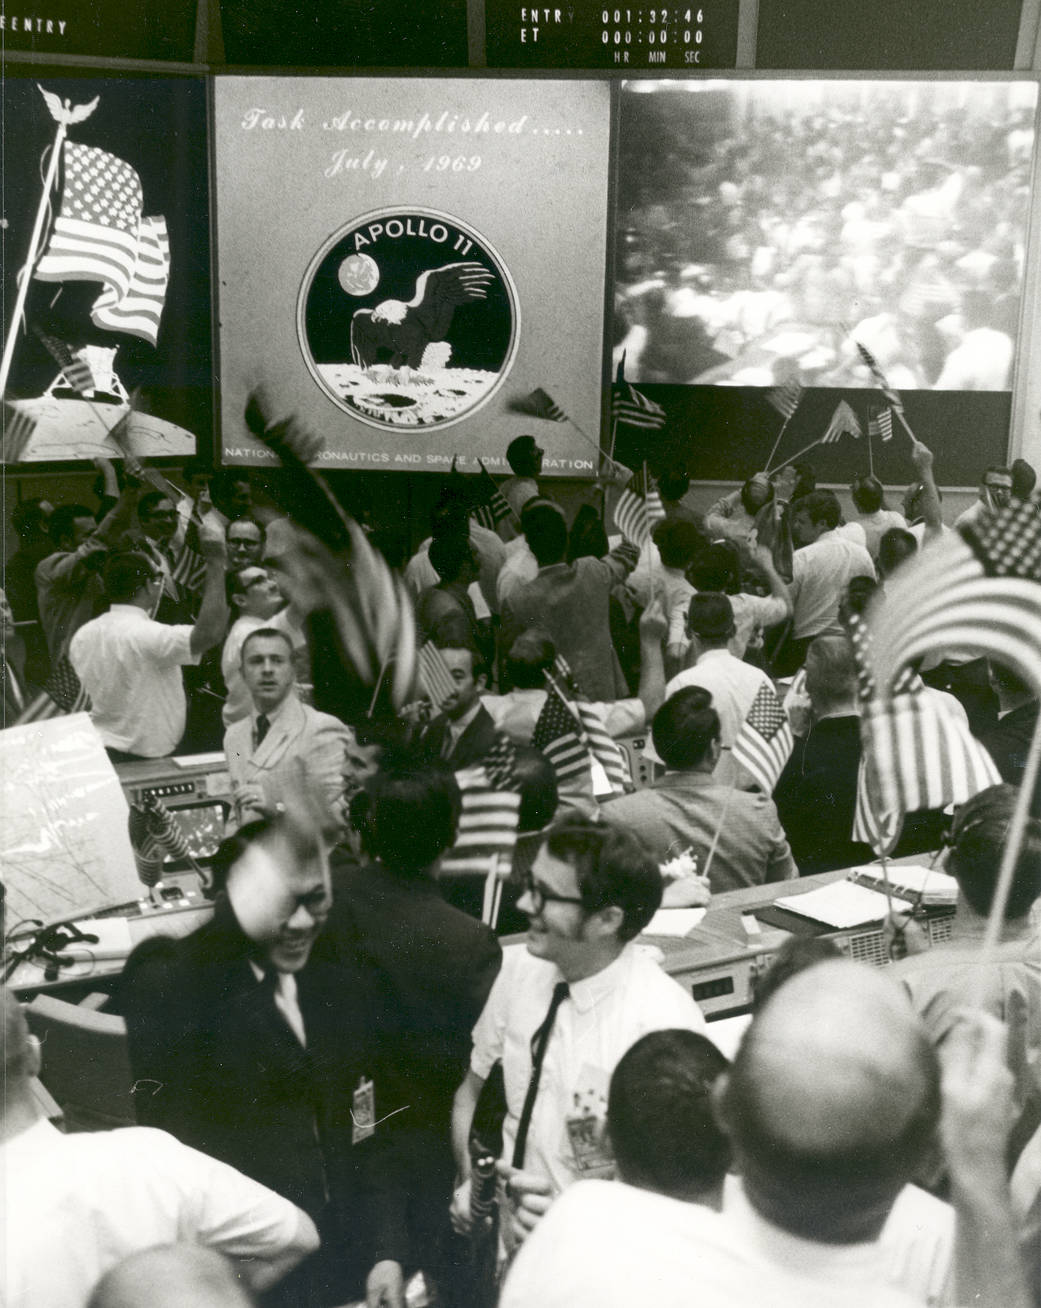 Celebration and waving American flags at Mission Control after Apollo 11 splashdown